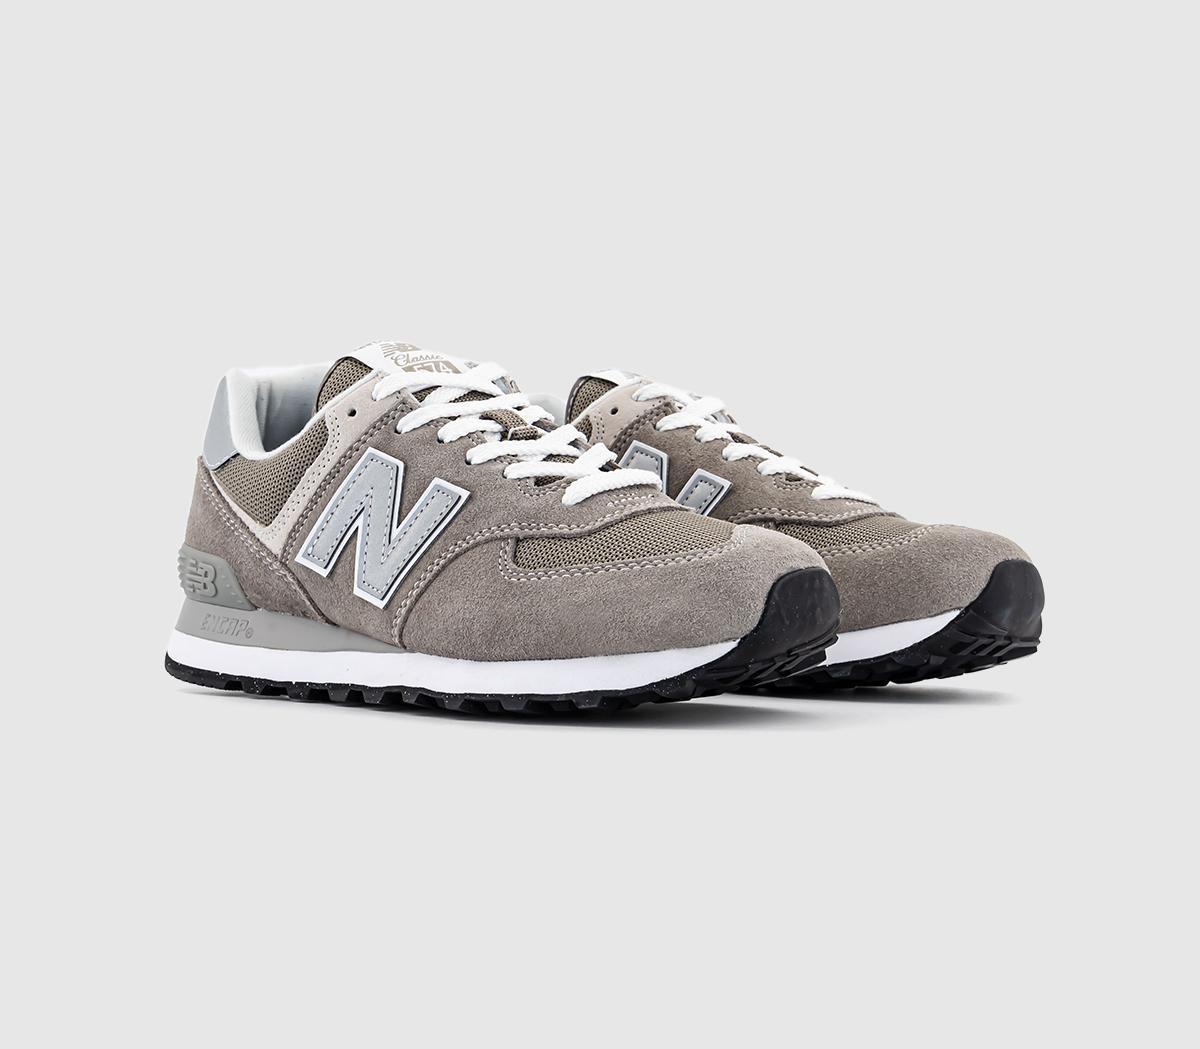 New Balance Mens 574 Trainers Grey White Green Leaf Rubber, 9